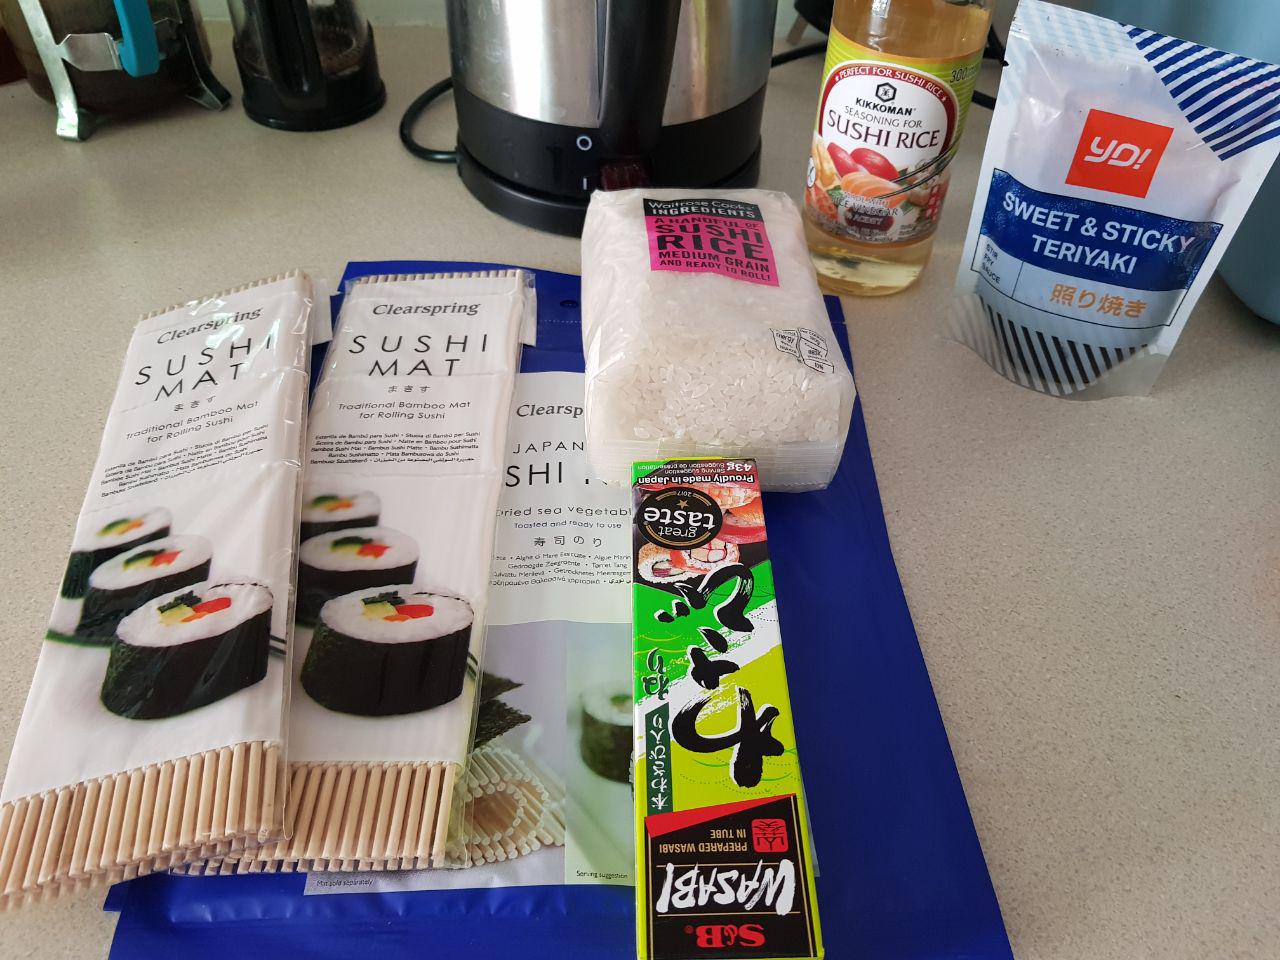 Photo: Cheap prepackaged sushi ingredients